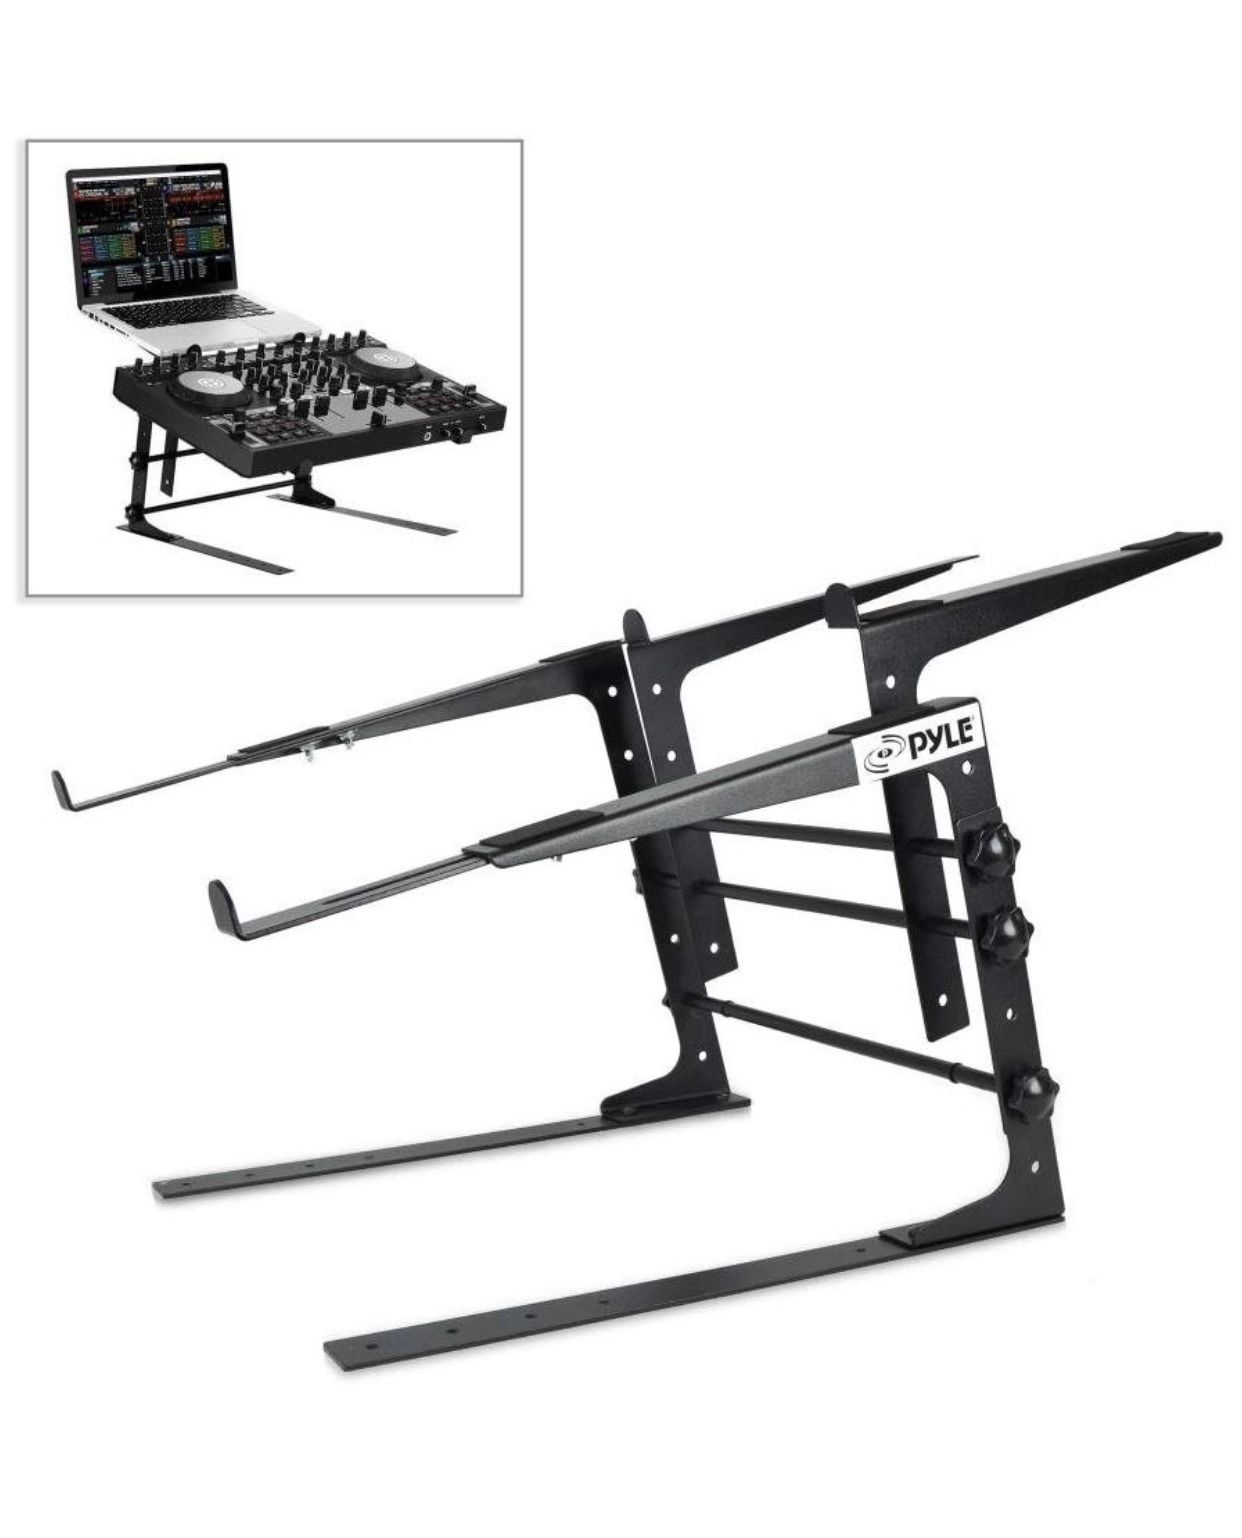 Pyle Portable Dual Laptop Stand - Universal Standing Table with Adjustable Height, Ergonomic Design & Anti-Slip